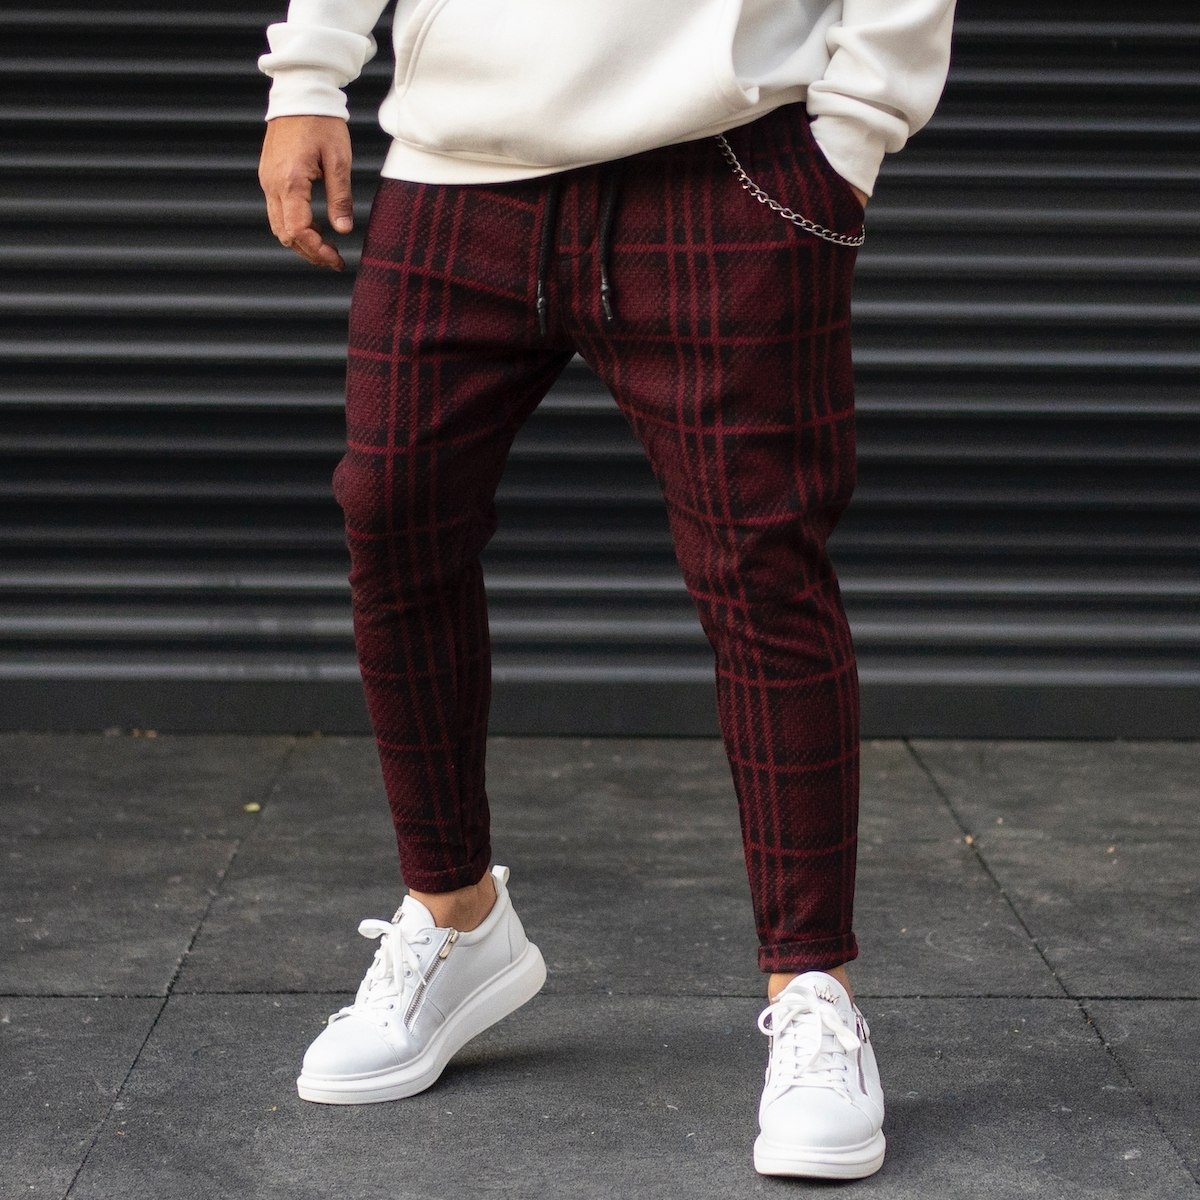 Men's Plaid Cachet Sweatpants With Chain Detail In Claret Red - 5